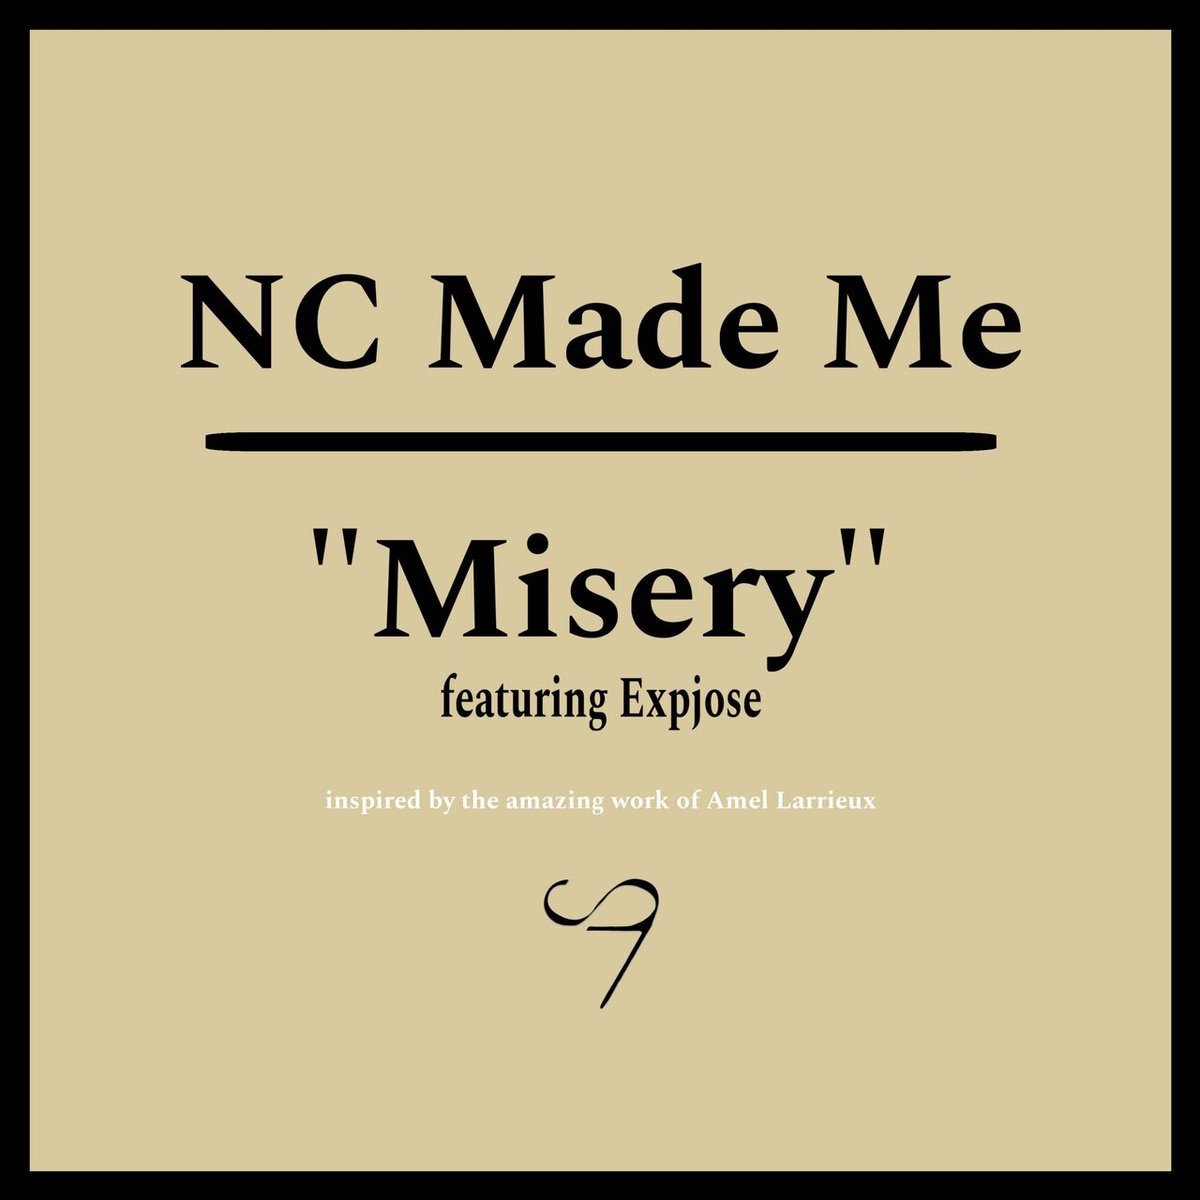 NC MADE ME - Misery (feat. Expjose) [Single]

#Brooklyn #Expjose #HipHop #HipHopSoul #NCMADEME #NeoSoul/NuSoul #NewYorkCity #NuSoul #Rap #TheAguilleCollective #NewMusic

italmassive.com/archives/44331